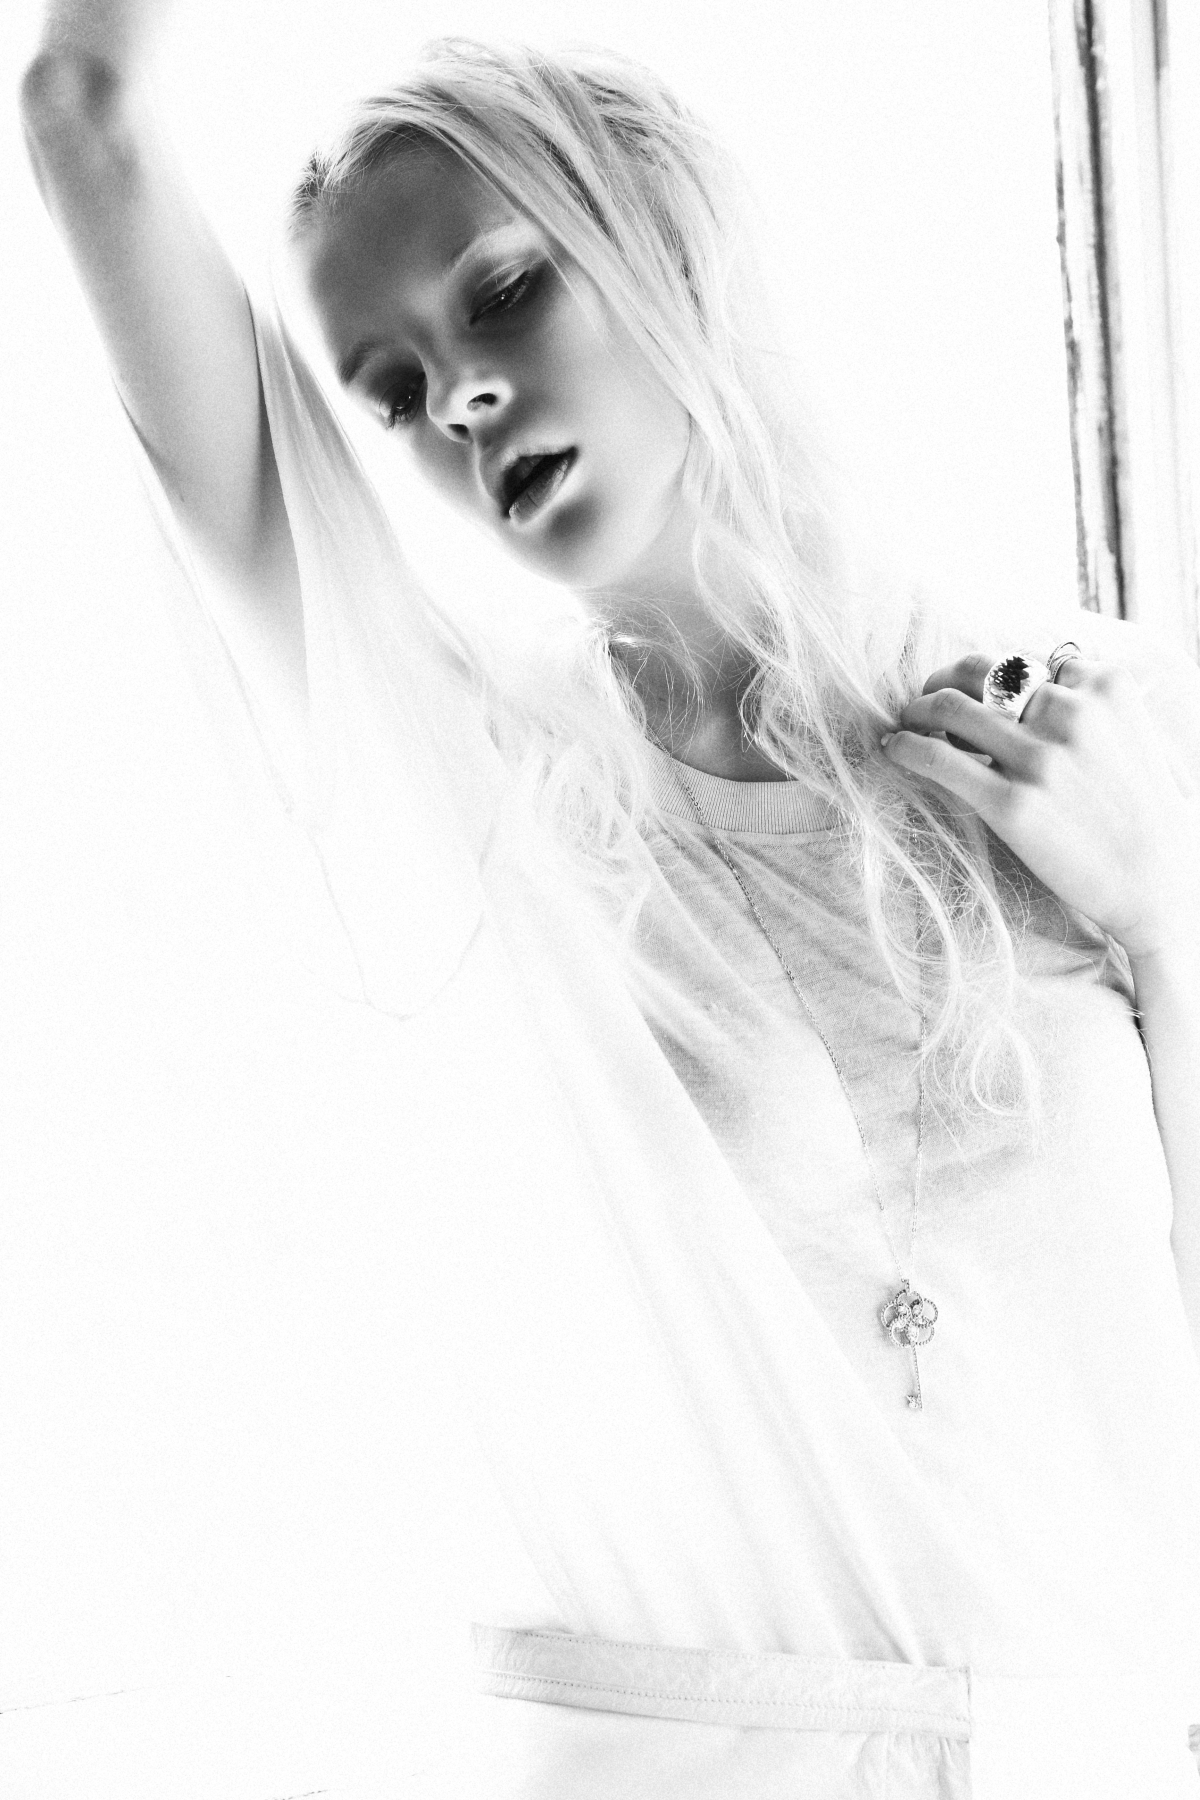 Jewellery First and The New Face Front runner, Bianca: White in B&W Editorial